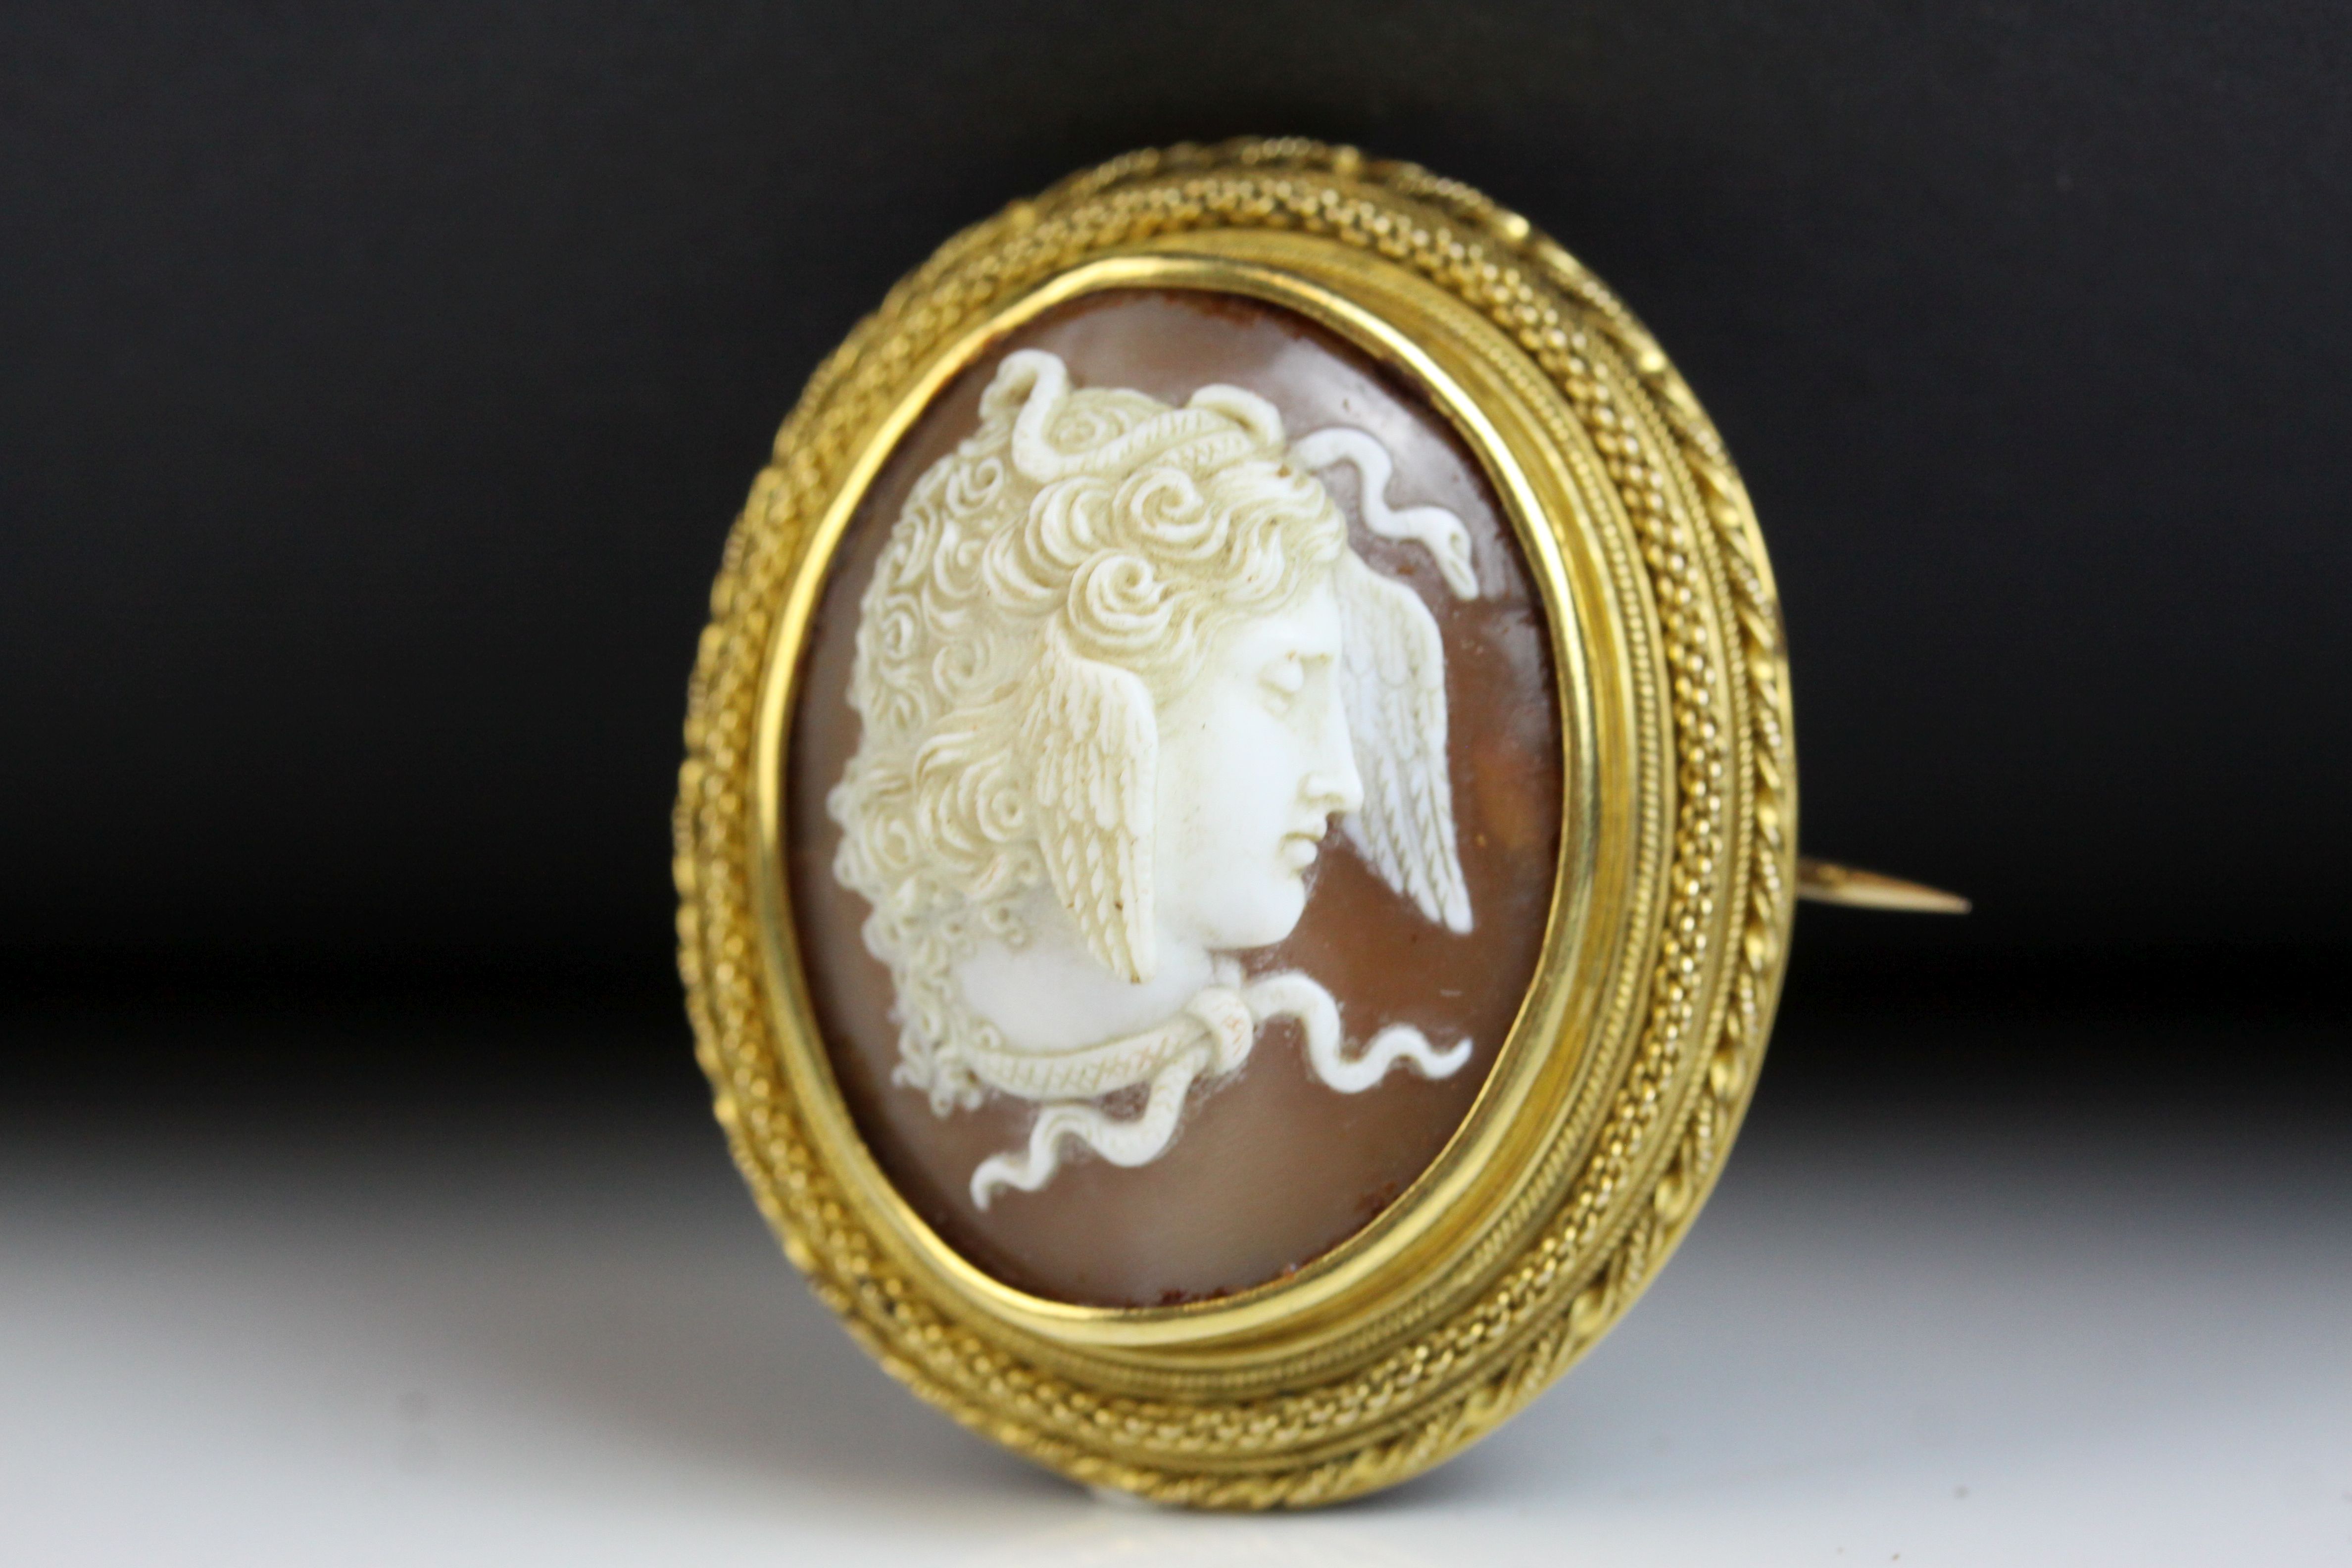 Victorian shell cameo yellow gold brooch depicting Medusa, rub over setting, fancy rope twist and